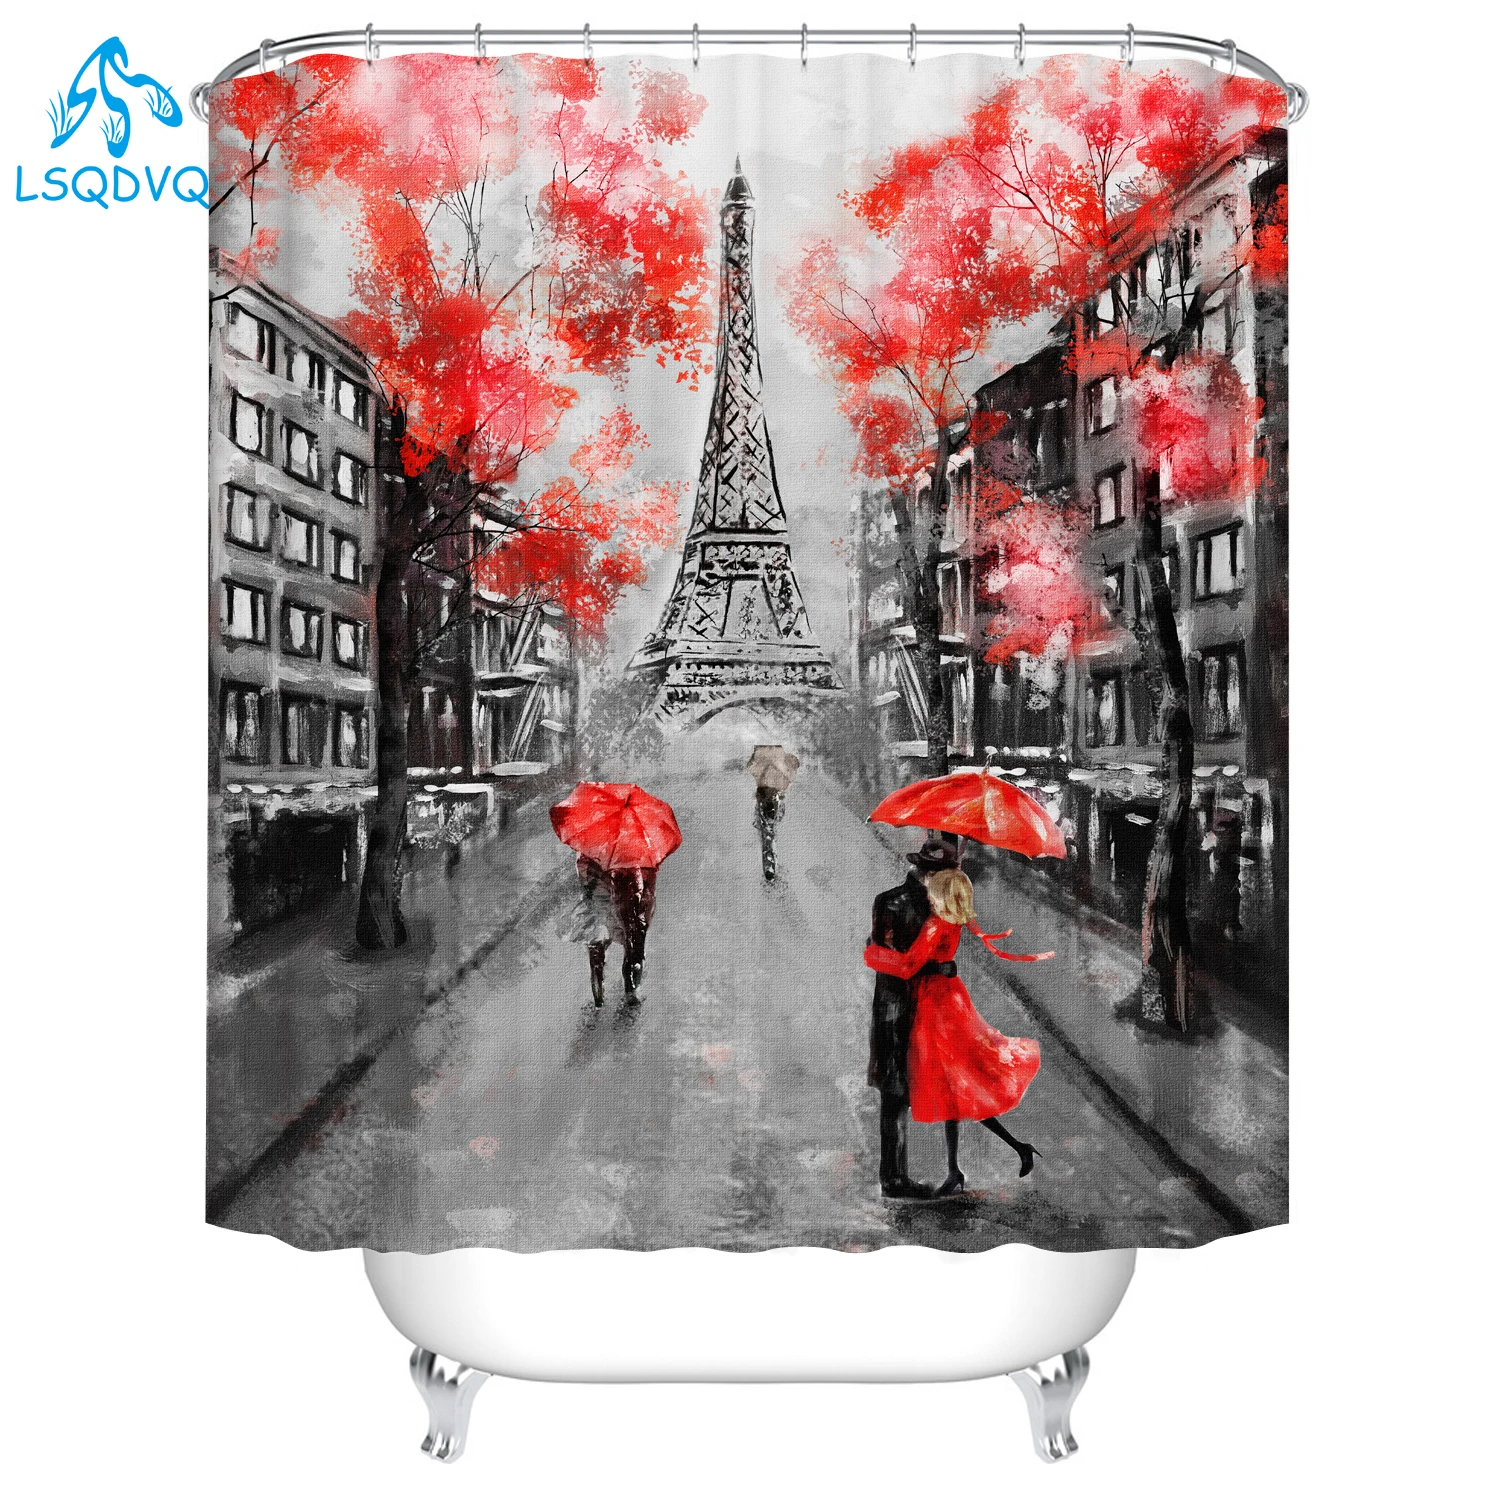 

Platform 9 and 3/4 At London's King's Cross Station Shower Curtains Bathroom Curtain Frabic Waterproof Polyester Bath Curtain